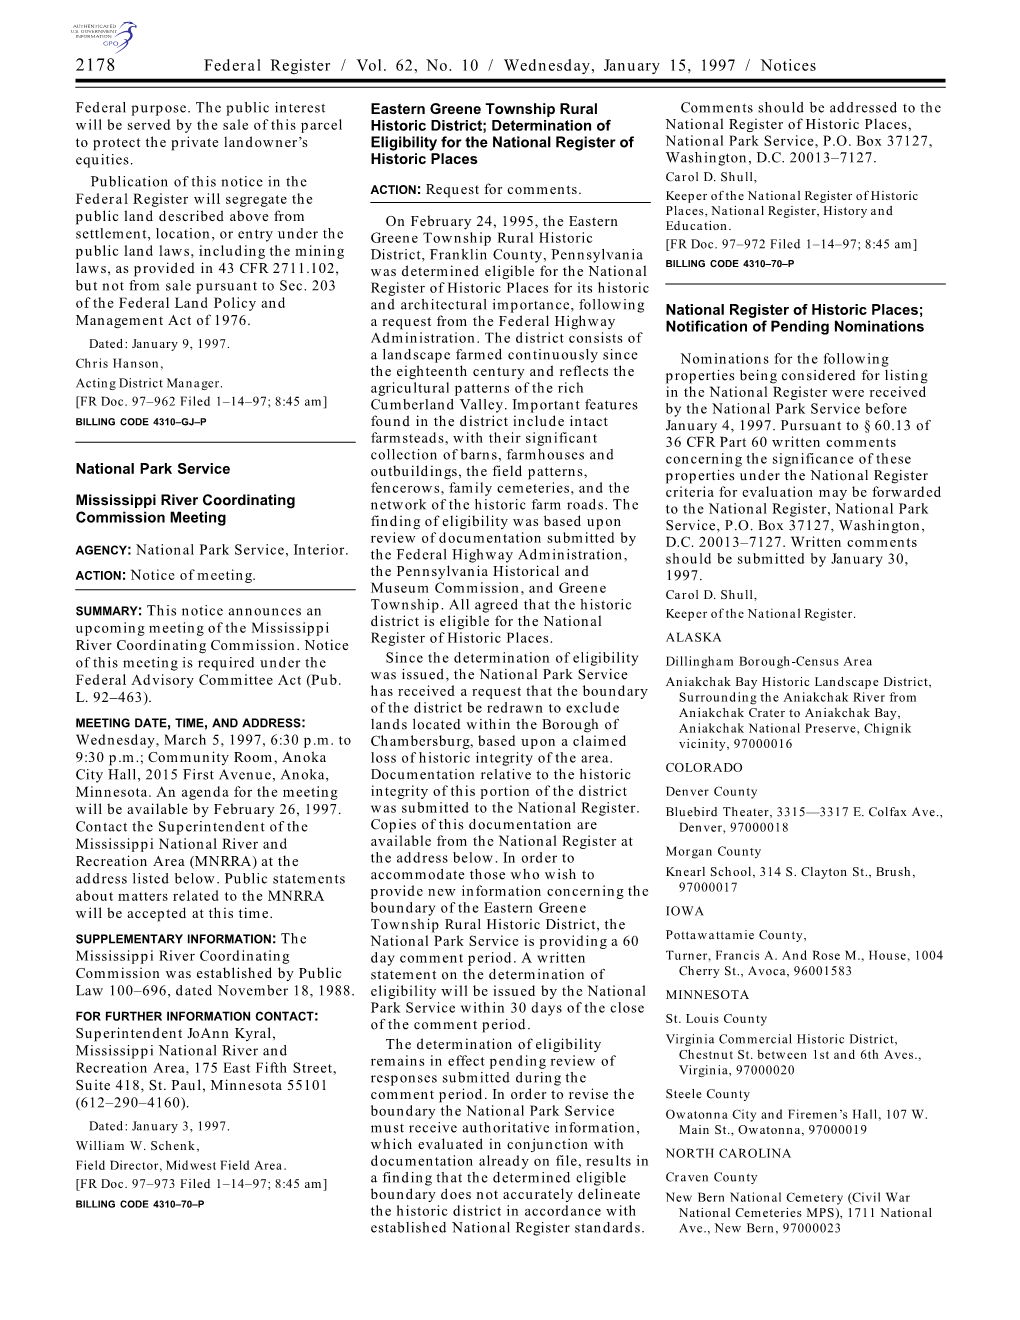 Federal Register / Vol. 62, No. 10 / Wednesday, January 15, 1997 / Notices